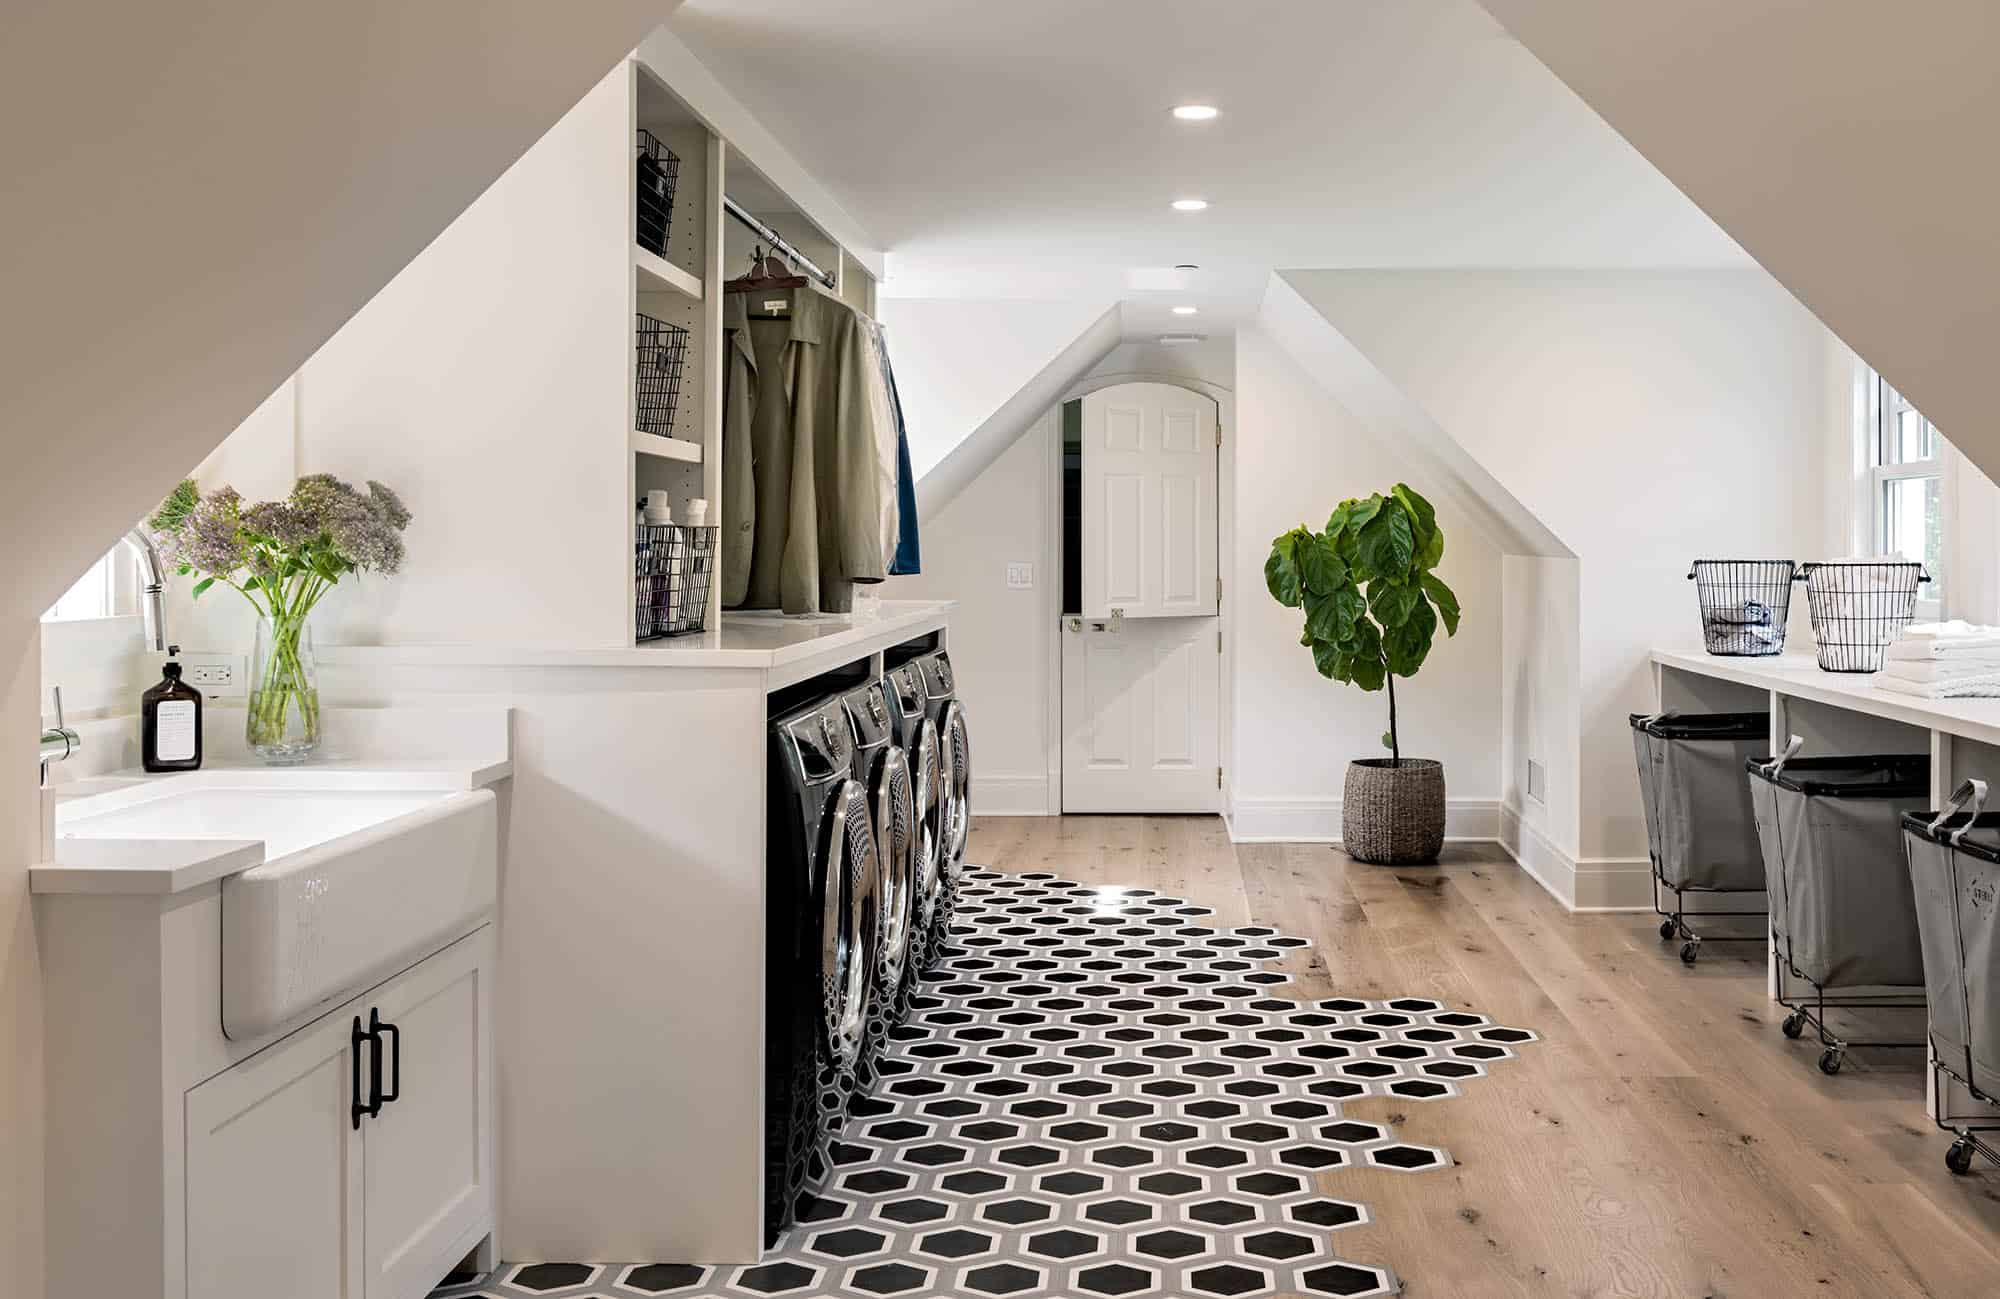 Laundry Room in the Eaves